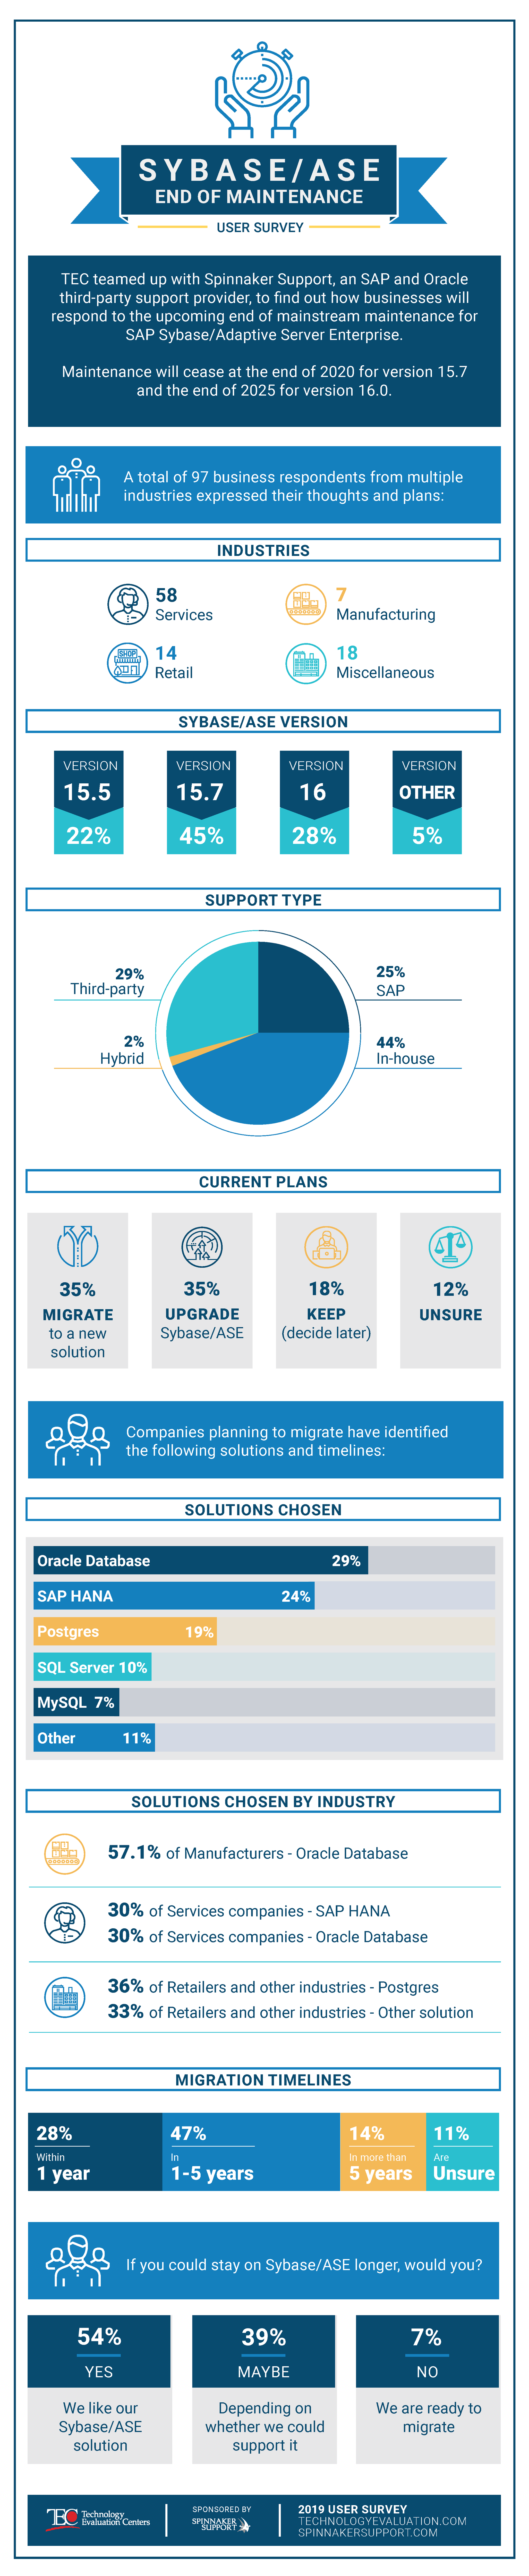 TEC Sybase/ASE Survey Results Infographic